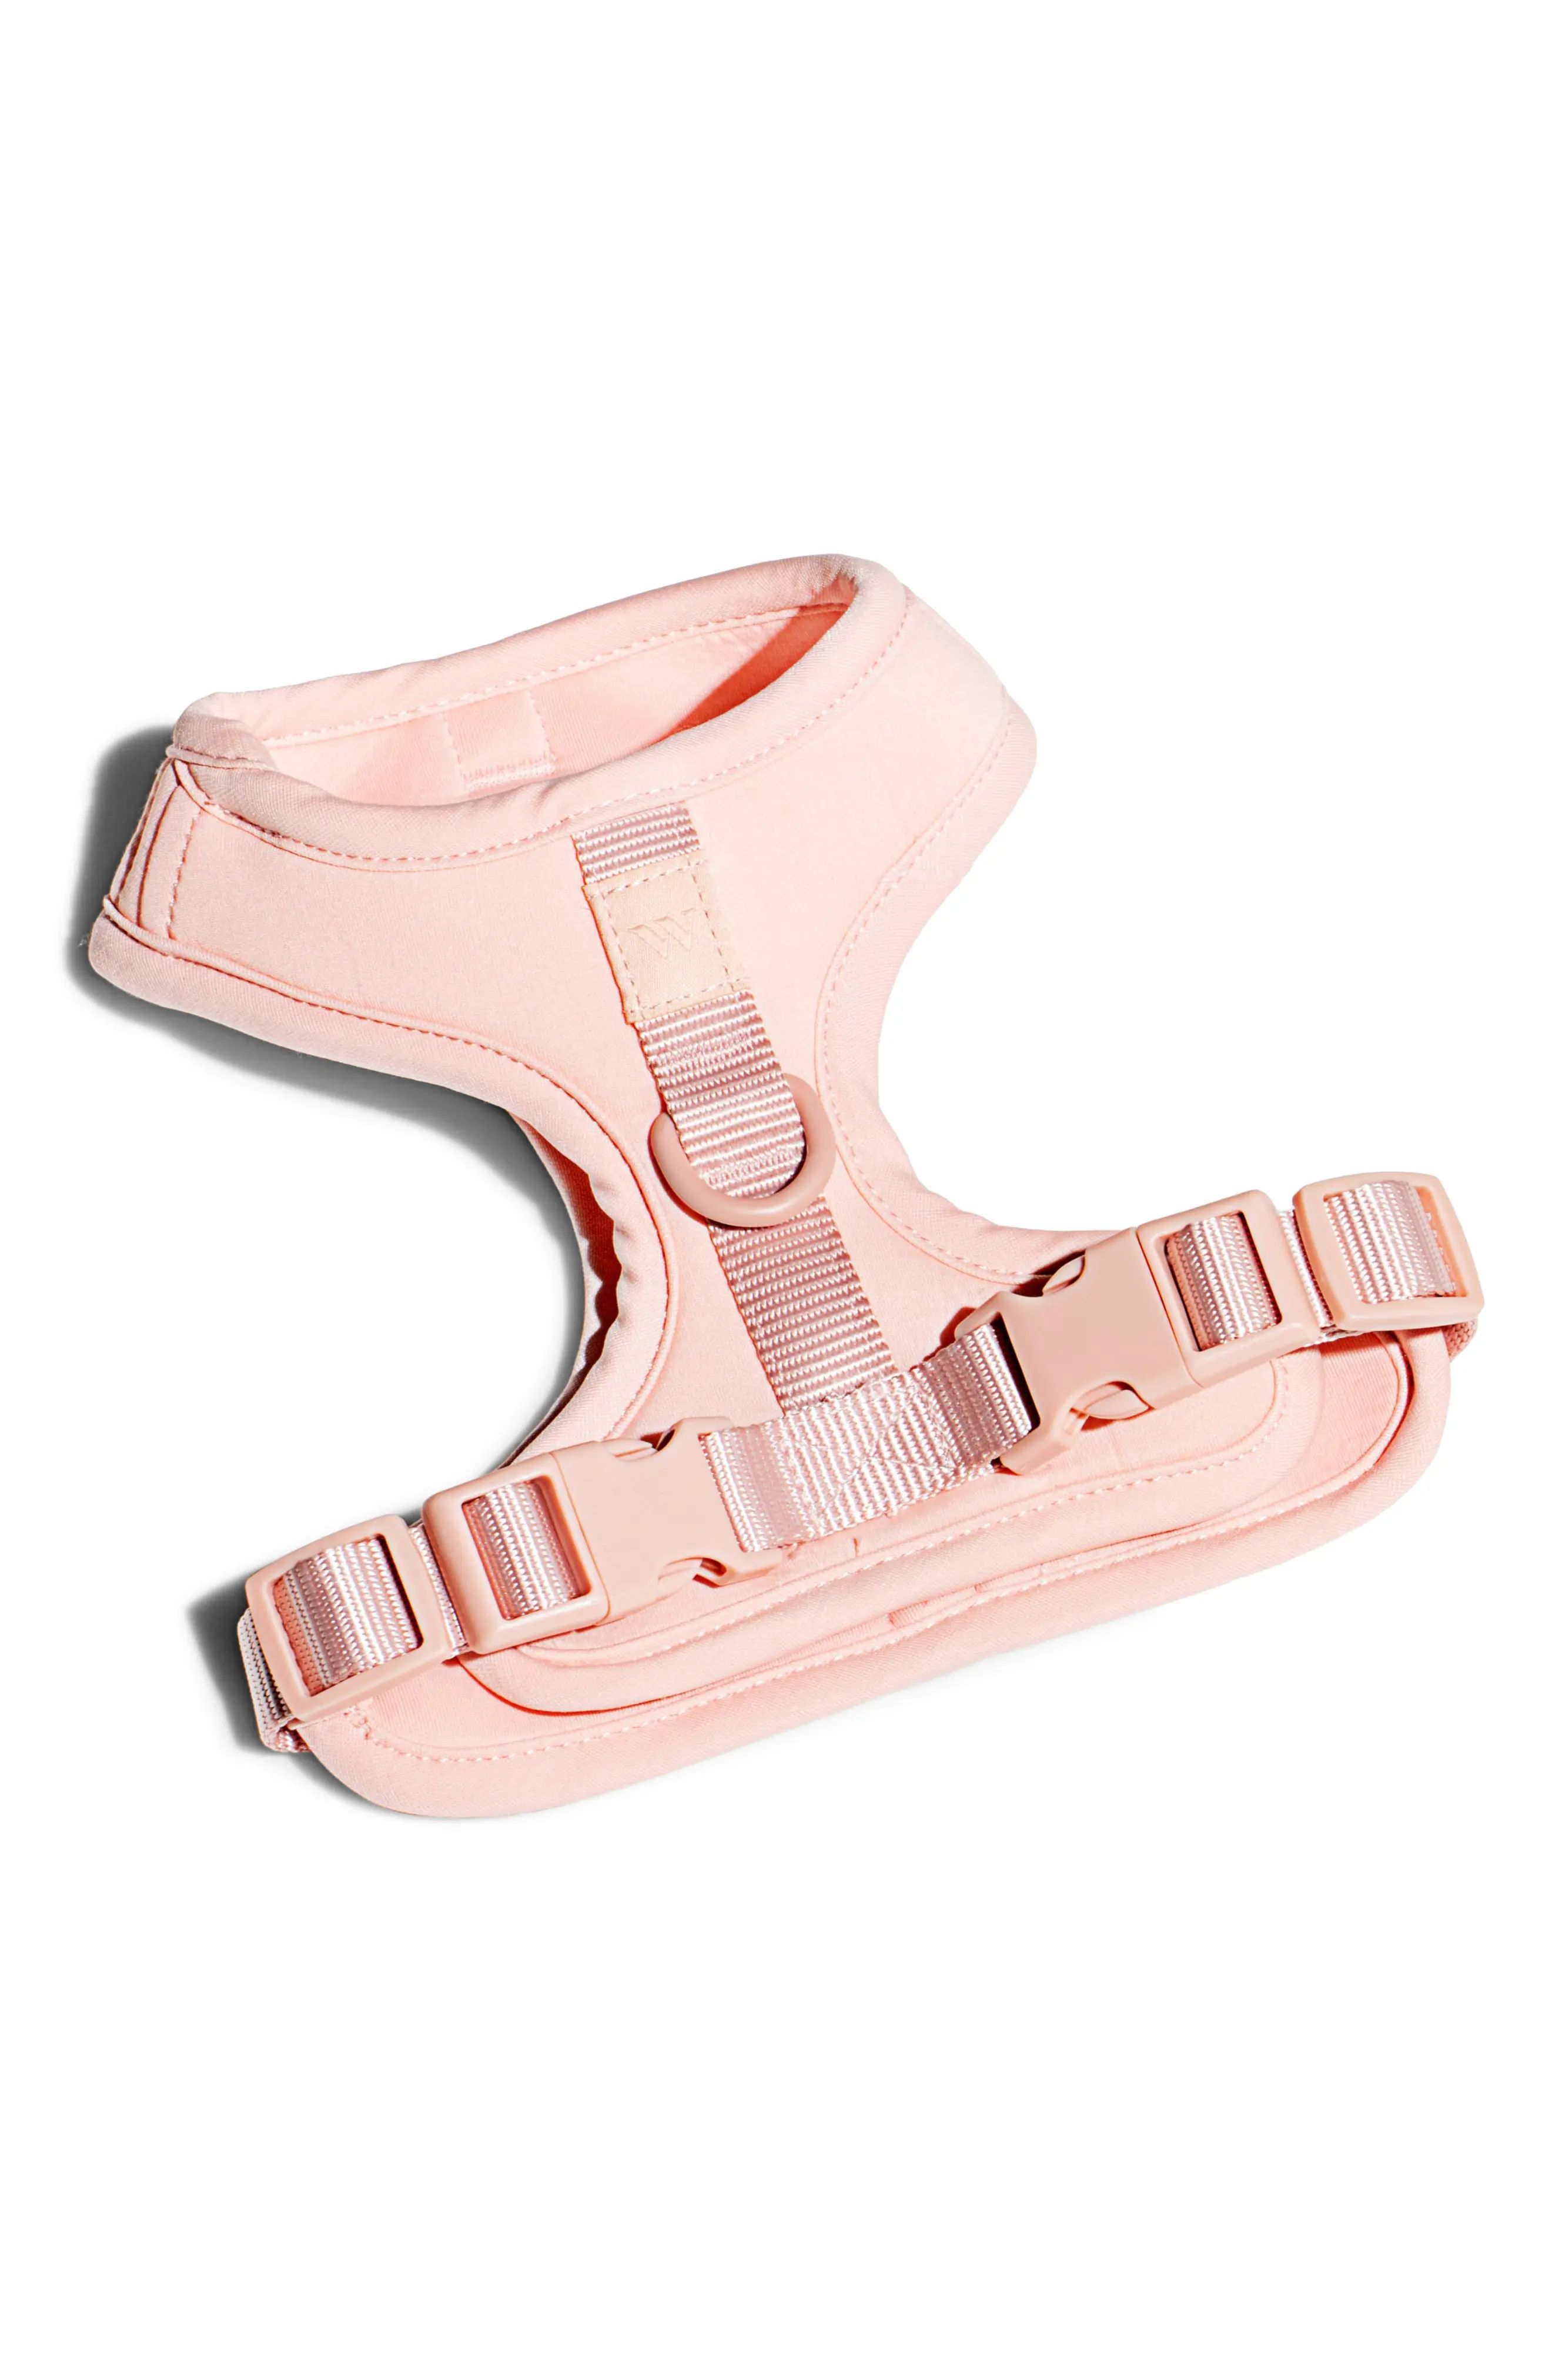 Wild One Dog Harness, Size Large - Pink | Nordstrom